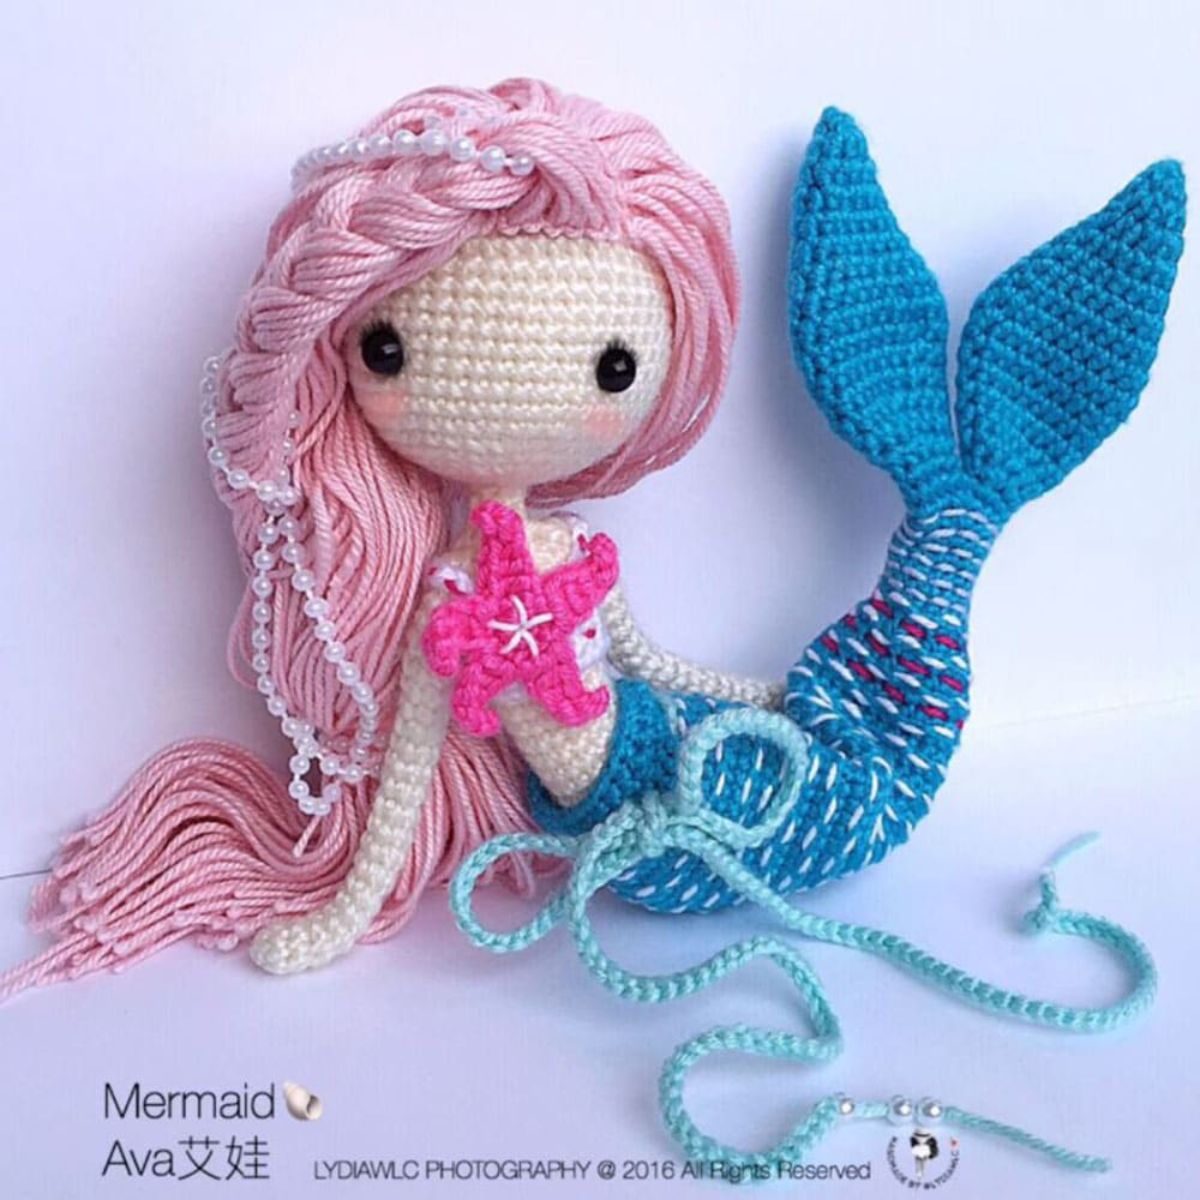 Crochet mermaid toy with pale pink hair, a pink starfish, and dark blue crochet tail with a pale blue bow on a lilac background. 